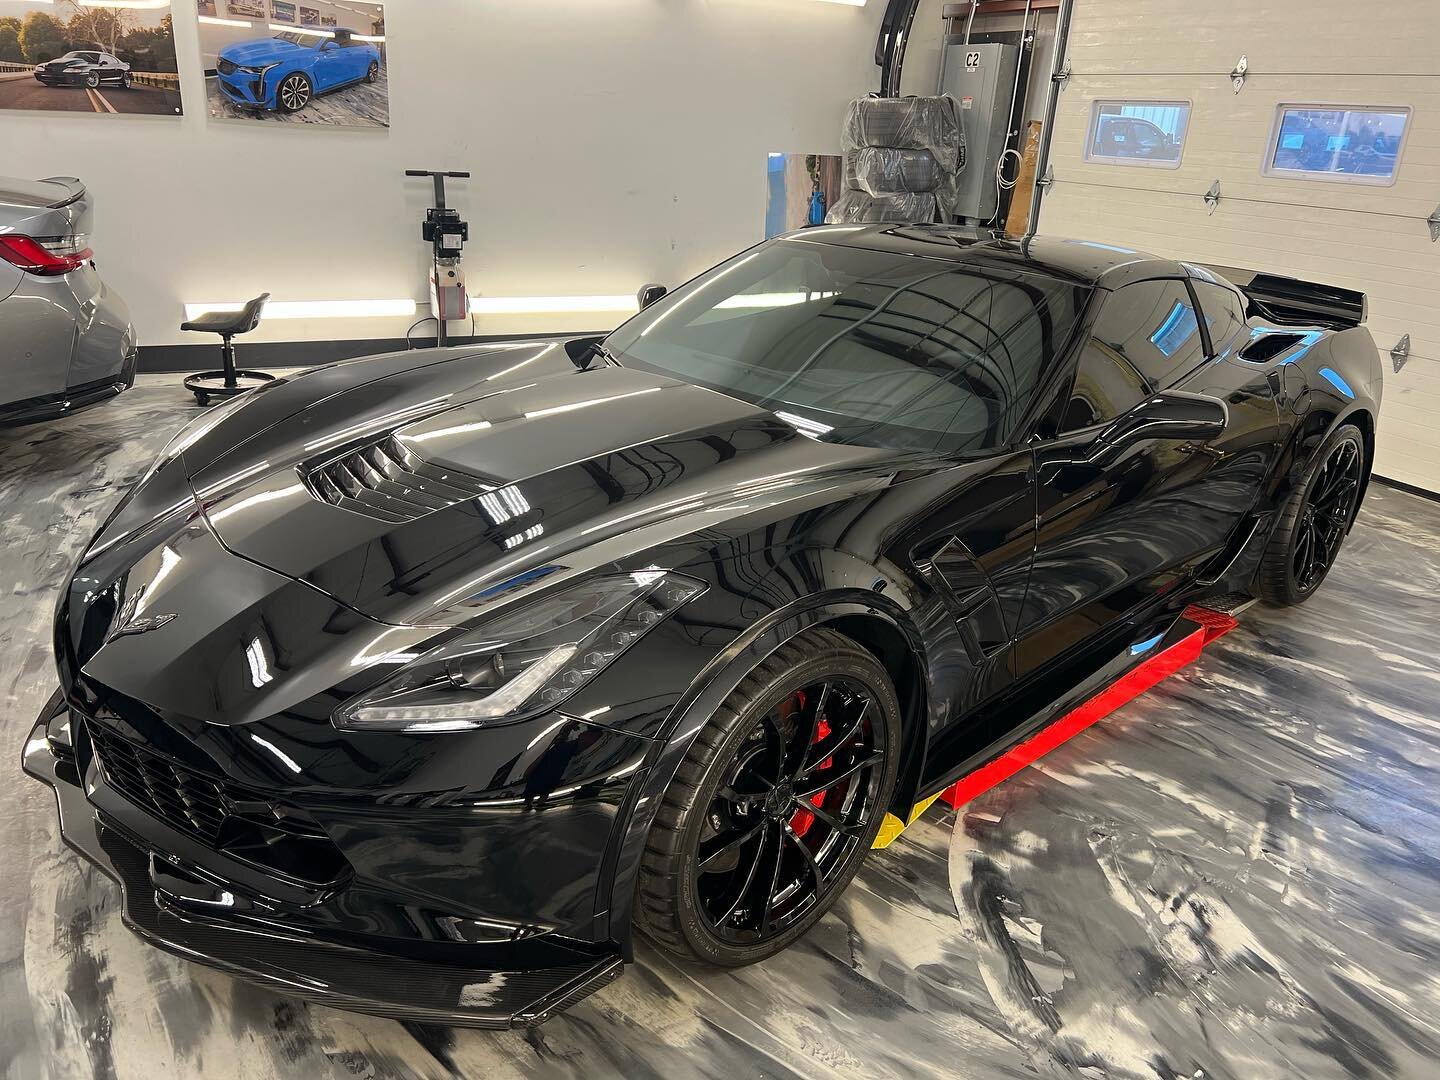 2019 Corvette Grandsport
Full Body Paint Protection Film
Exo V5 and C2V3

This pollen magnet received full body protection film to keep that black swirl free and safe to wipe down and rub on.

If you&rsquo;re looking for information on paint protecti